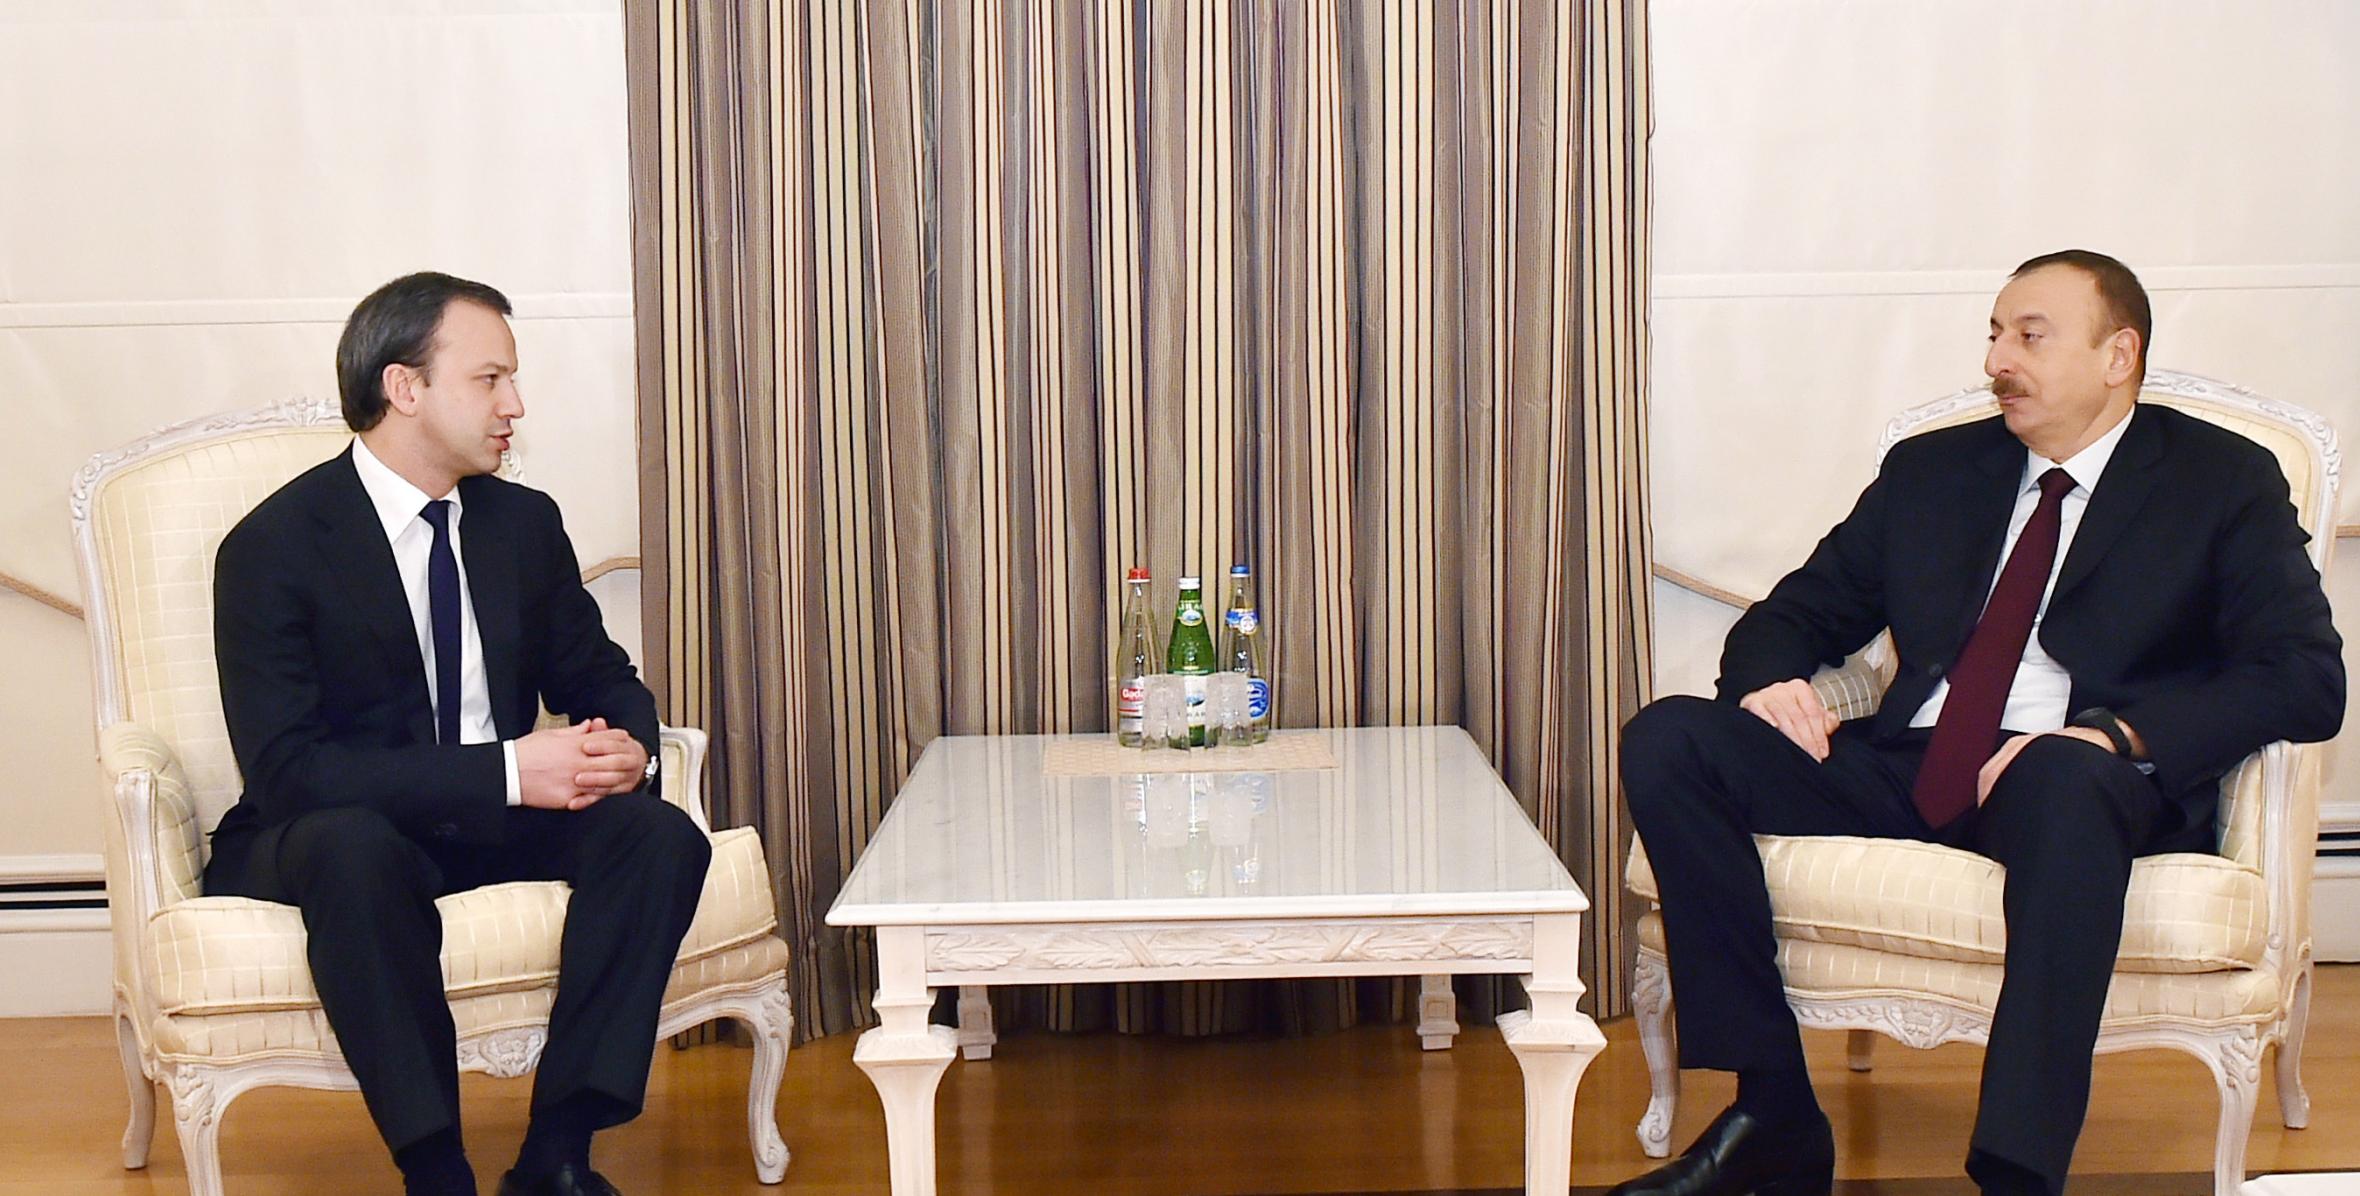 Ilham Aliyev received the Deputy Head of the Russian Government